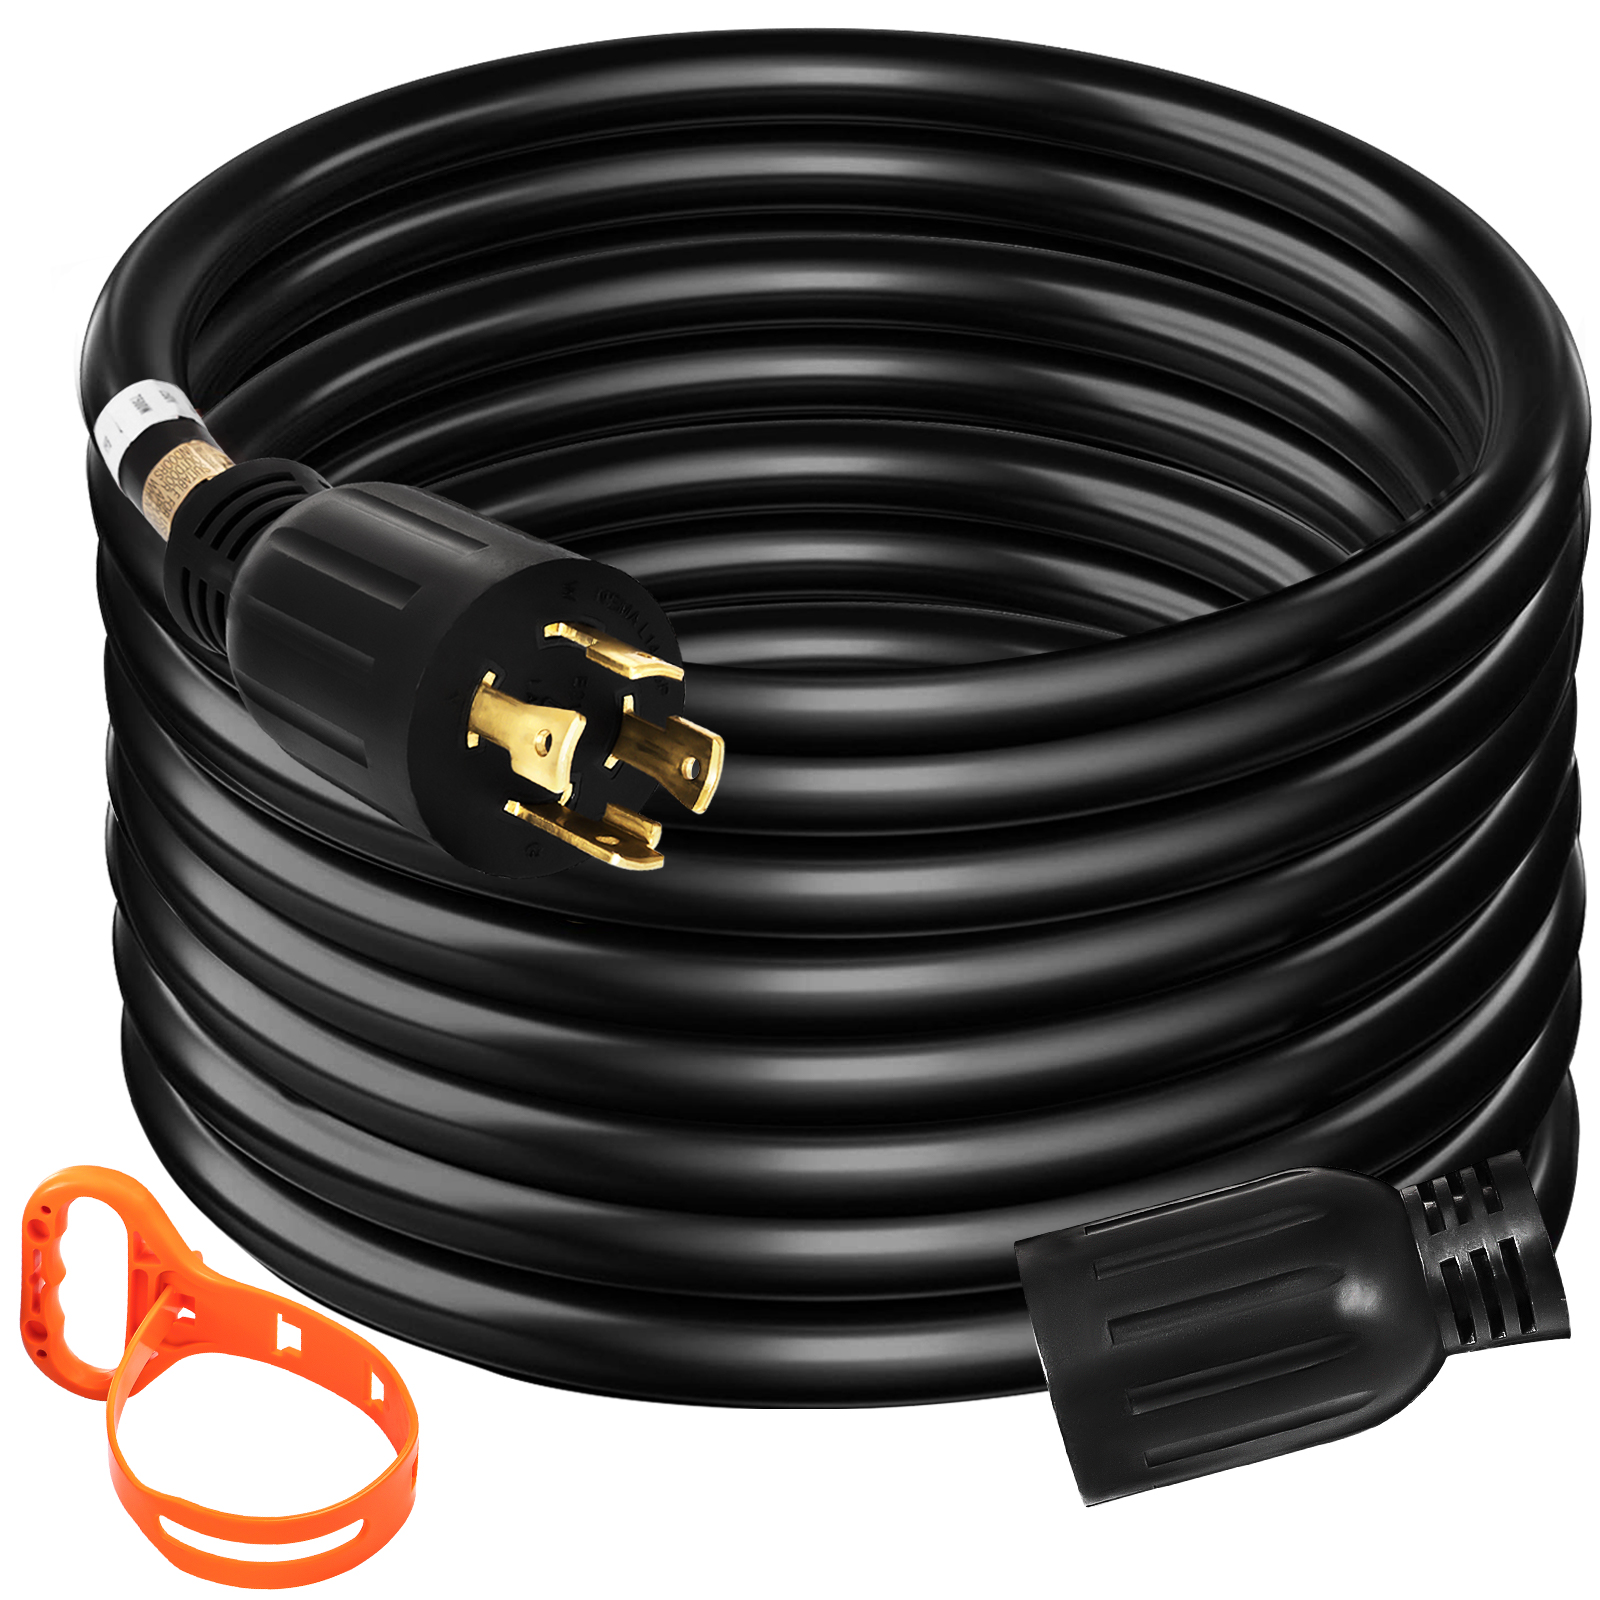 VEVOR Generator Extension Cord 40' 10/4 Power Cable 30 Amp Adapter Plug Copper Wire